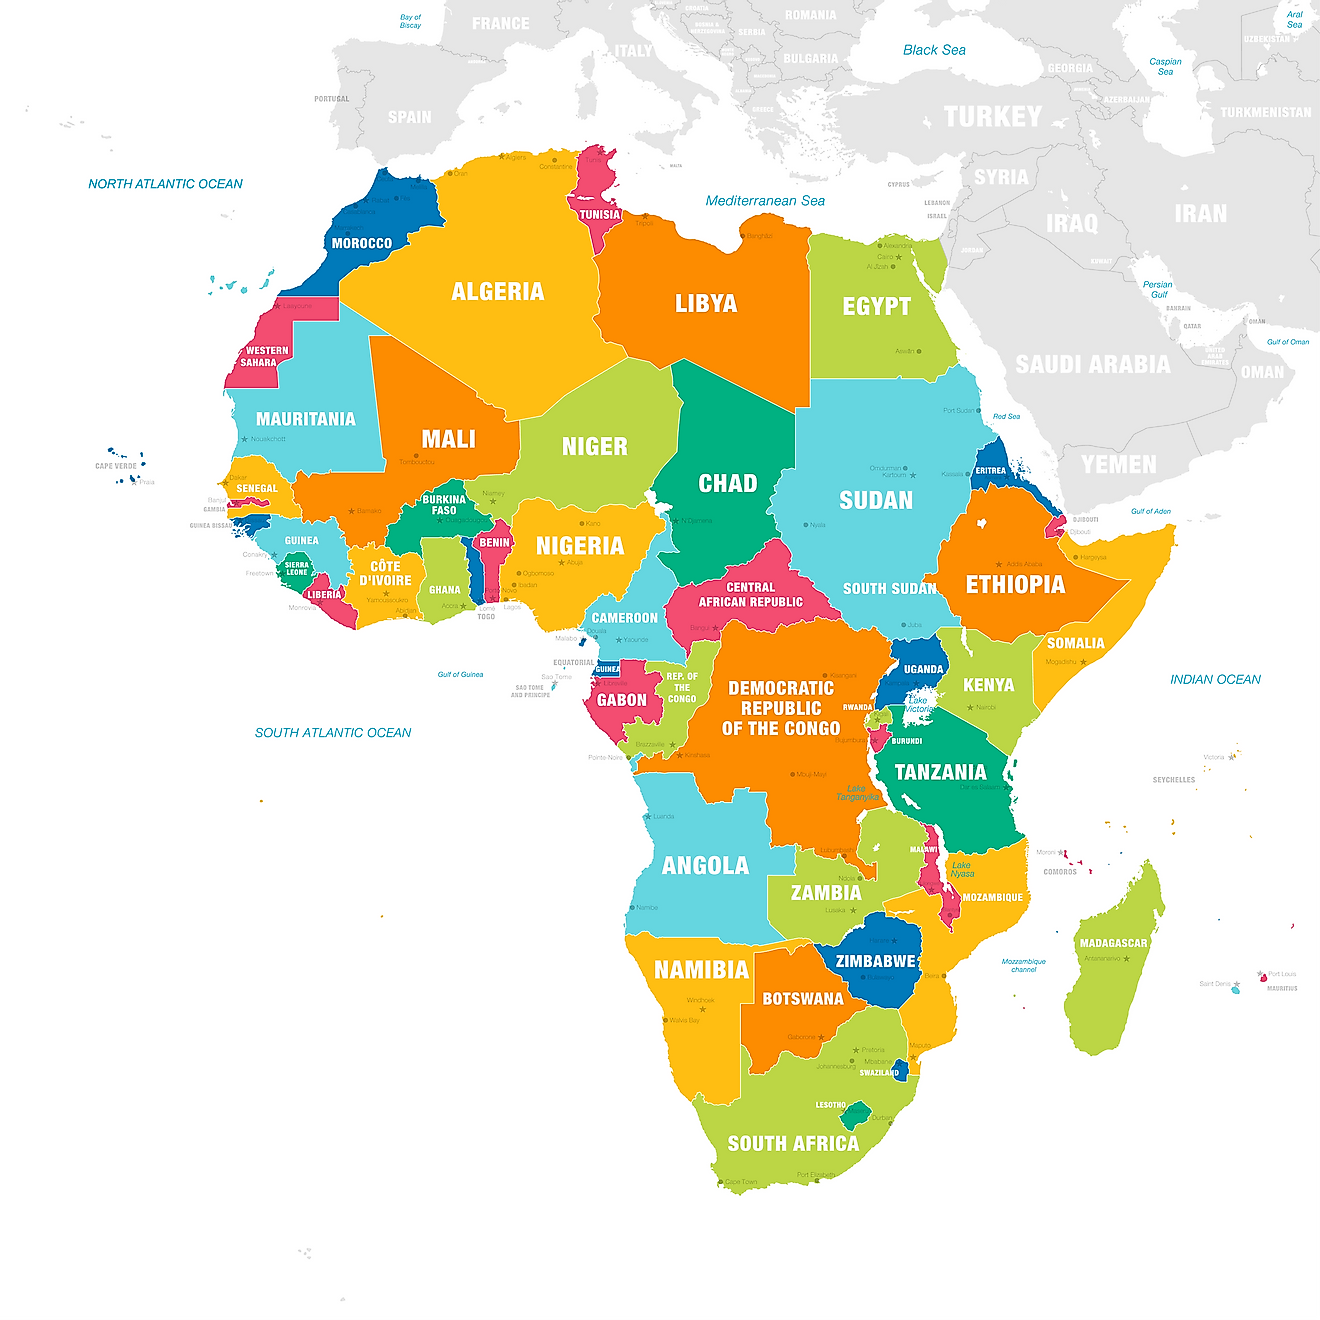 Countries In Africa On Map How Many Countries Are There In Africa? - Worldatlas